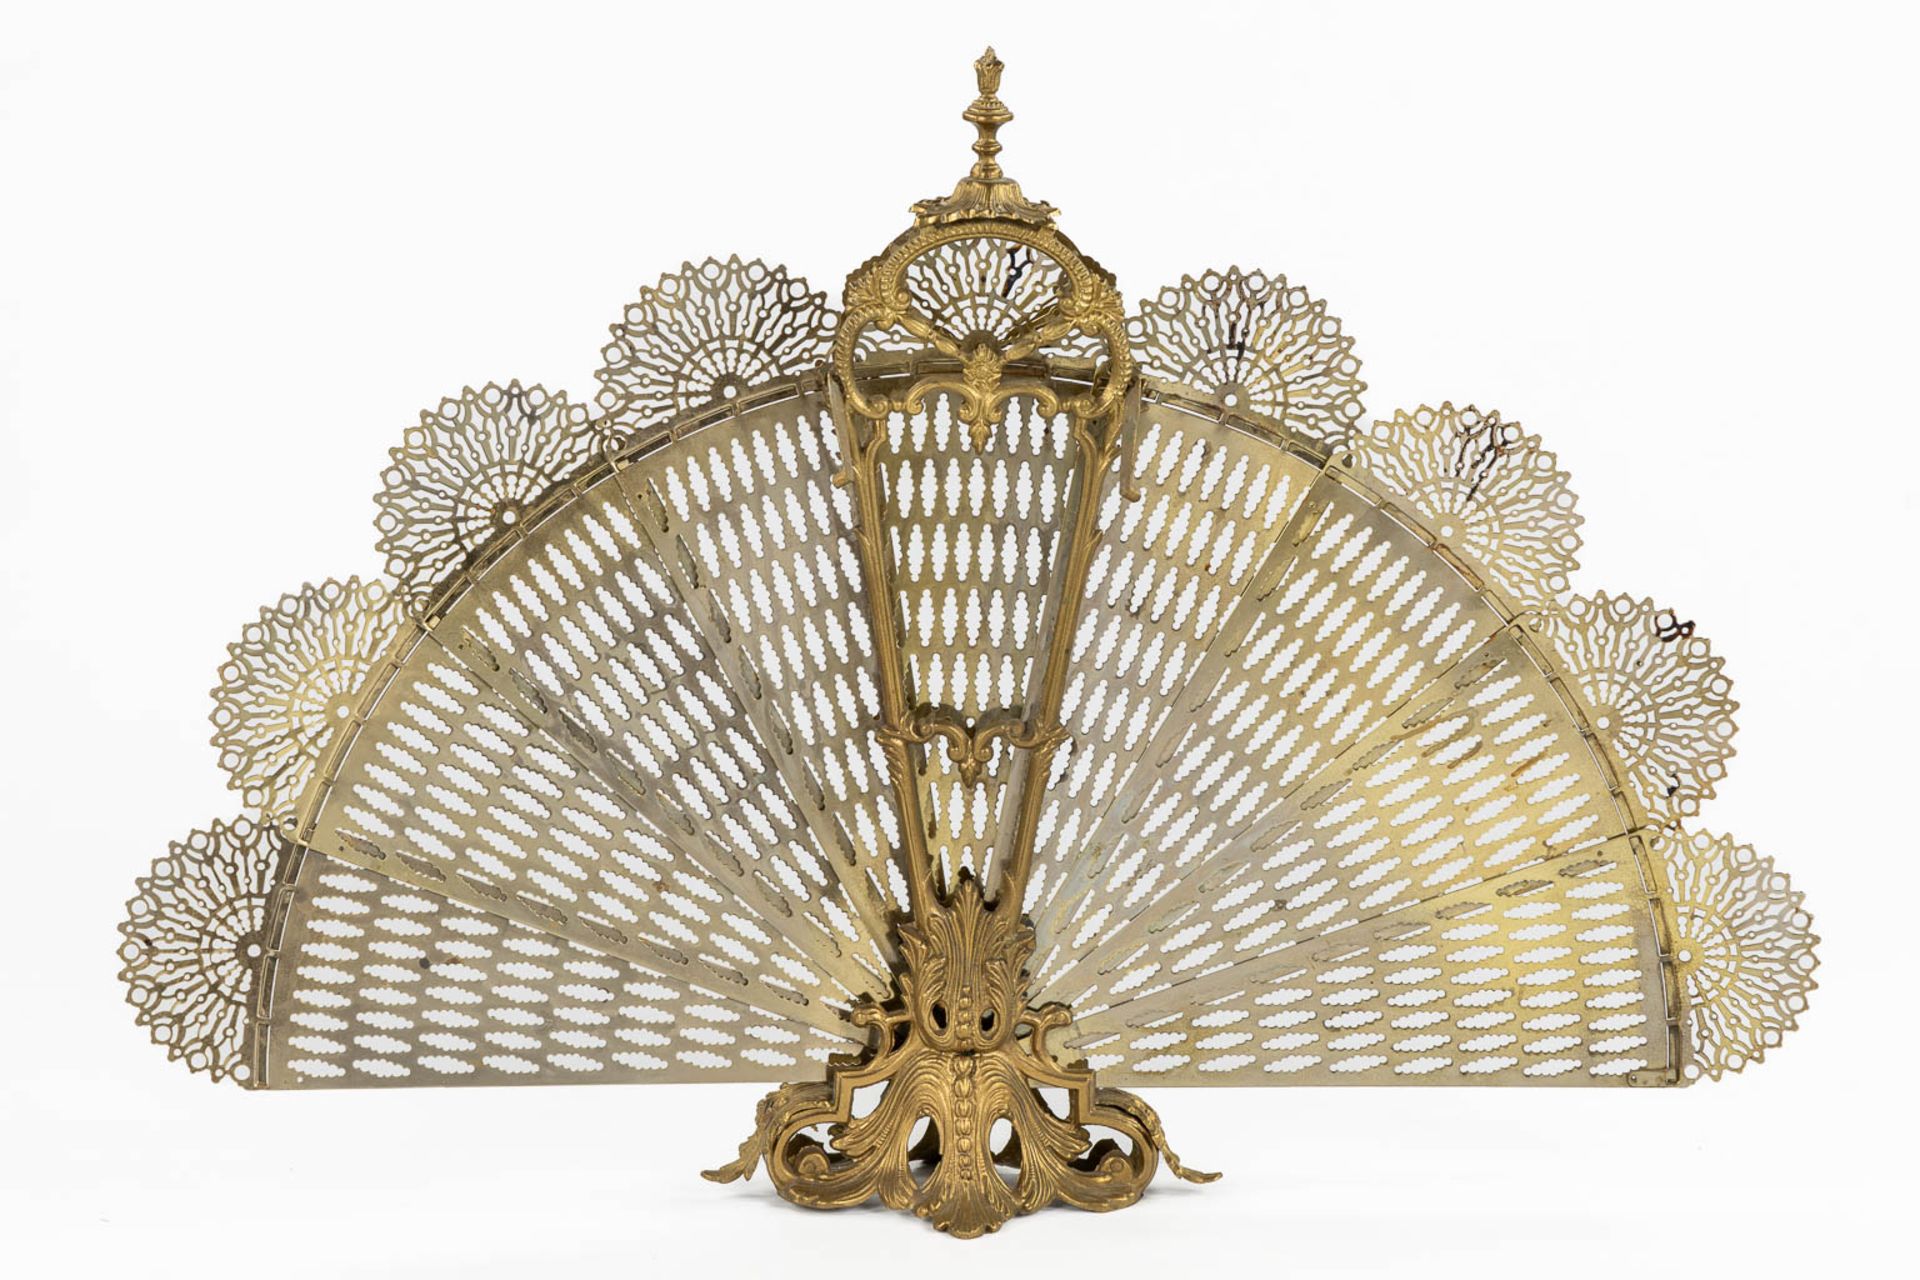 A 'Peacock' Fireplace screen, brass. (L:15 x W:88 x H:60 cm) - Image 3 of 7